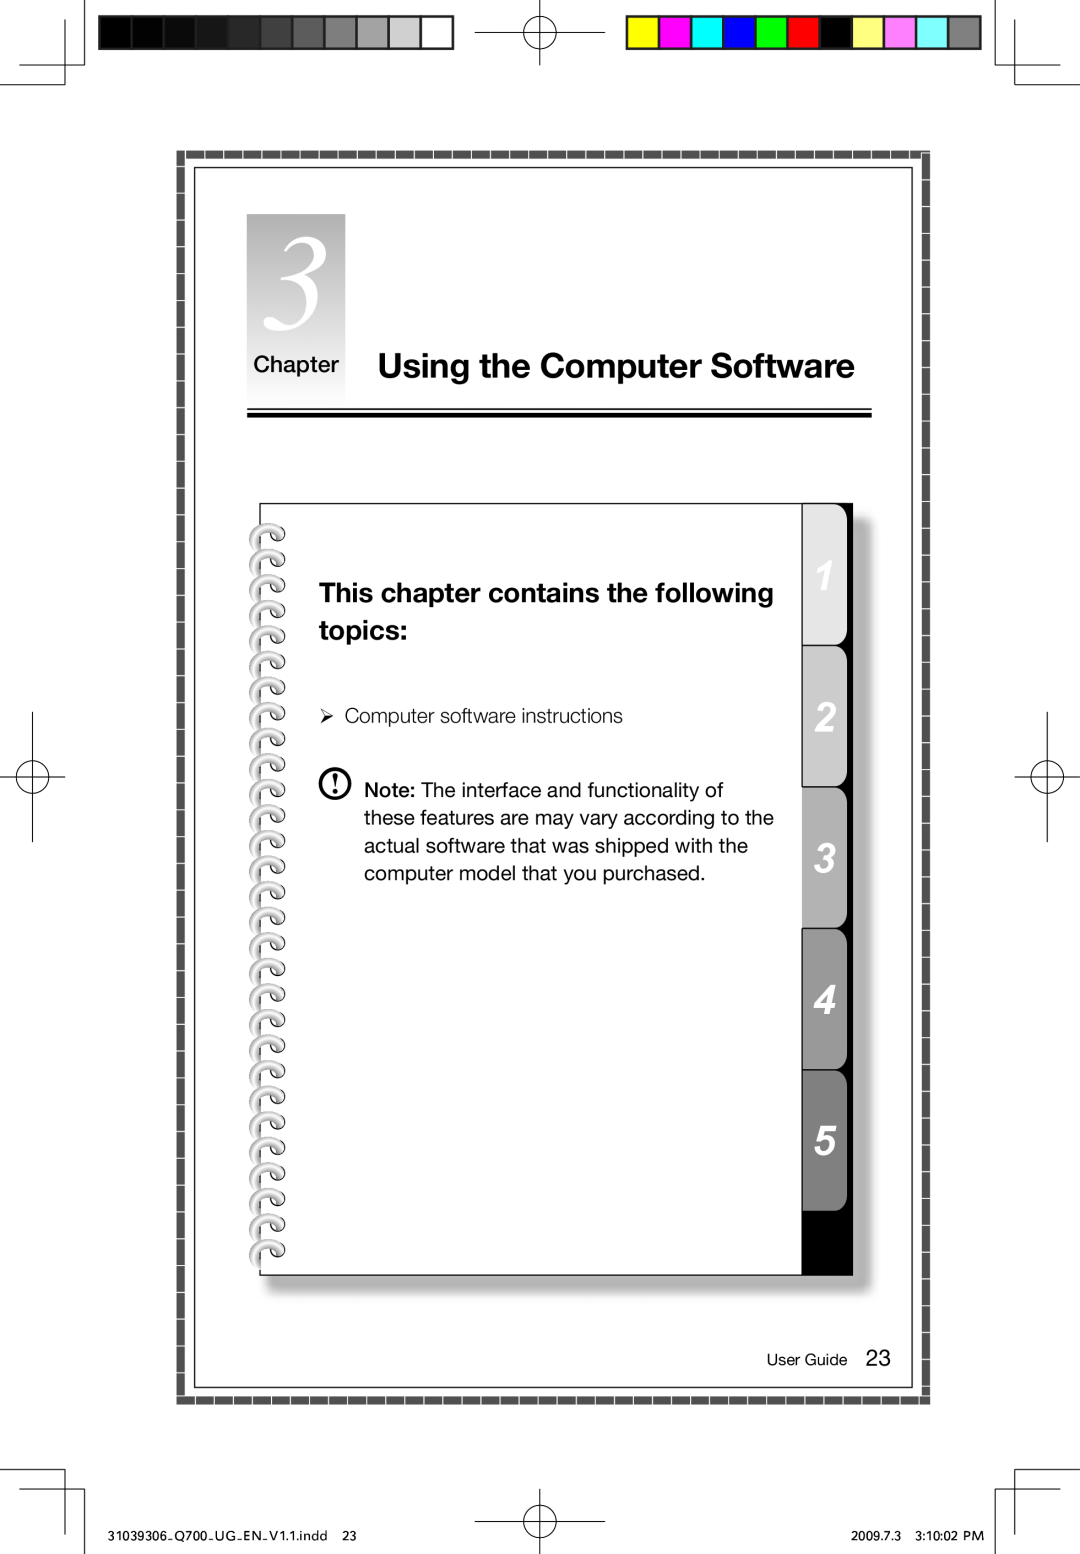 Lenovo Q700 Chapter Using the Computer Software, This chapter contains the following topics, User Guide, 2009.7.3 31002 PM 